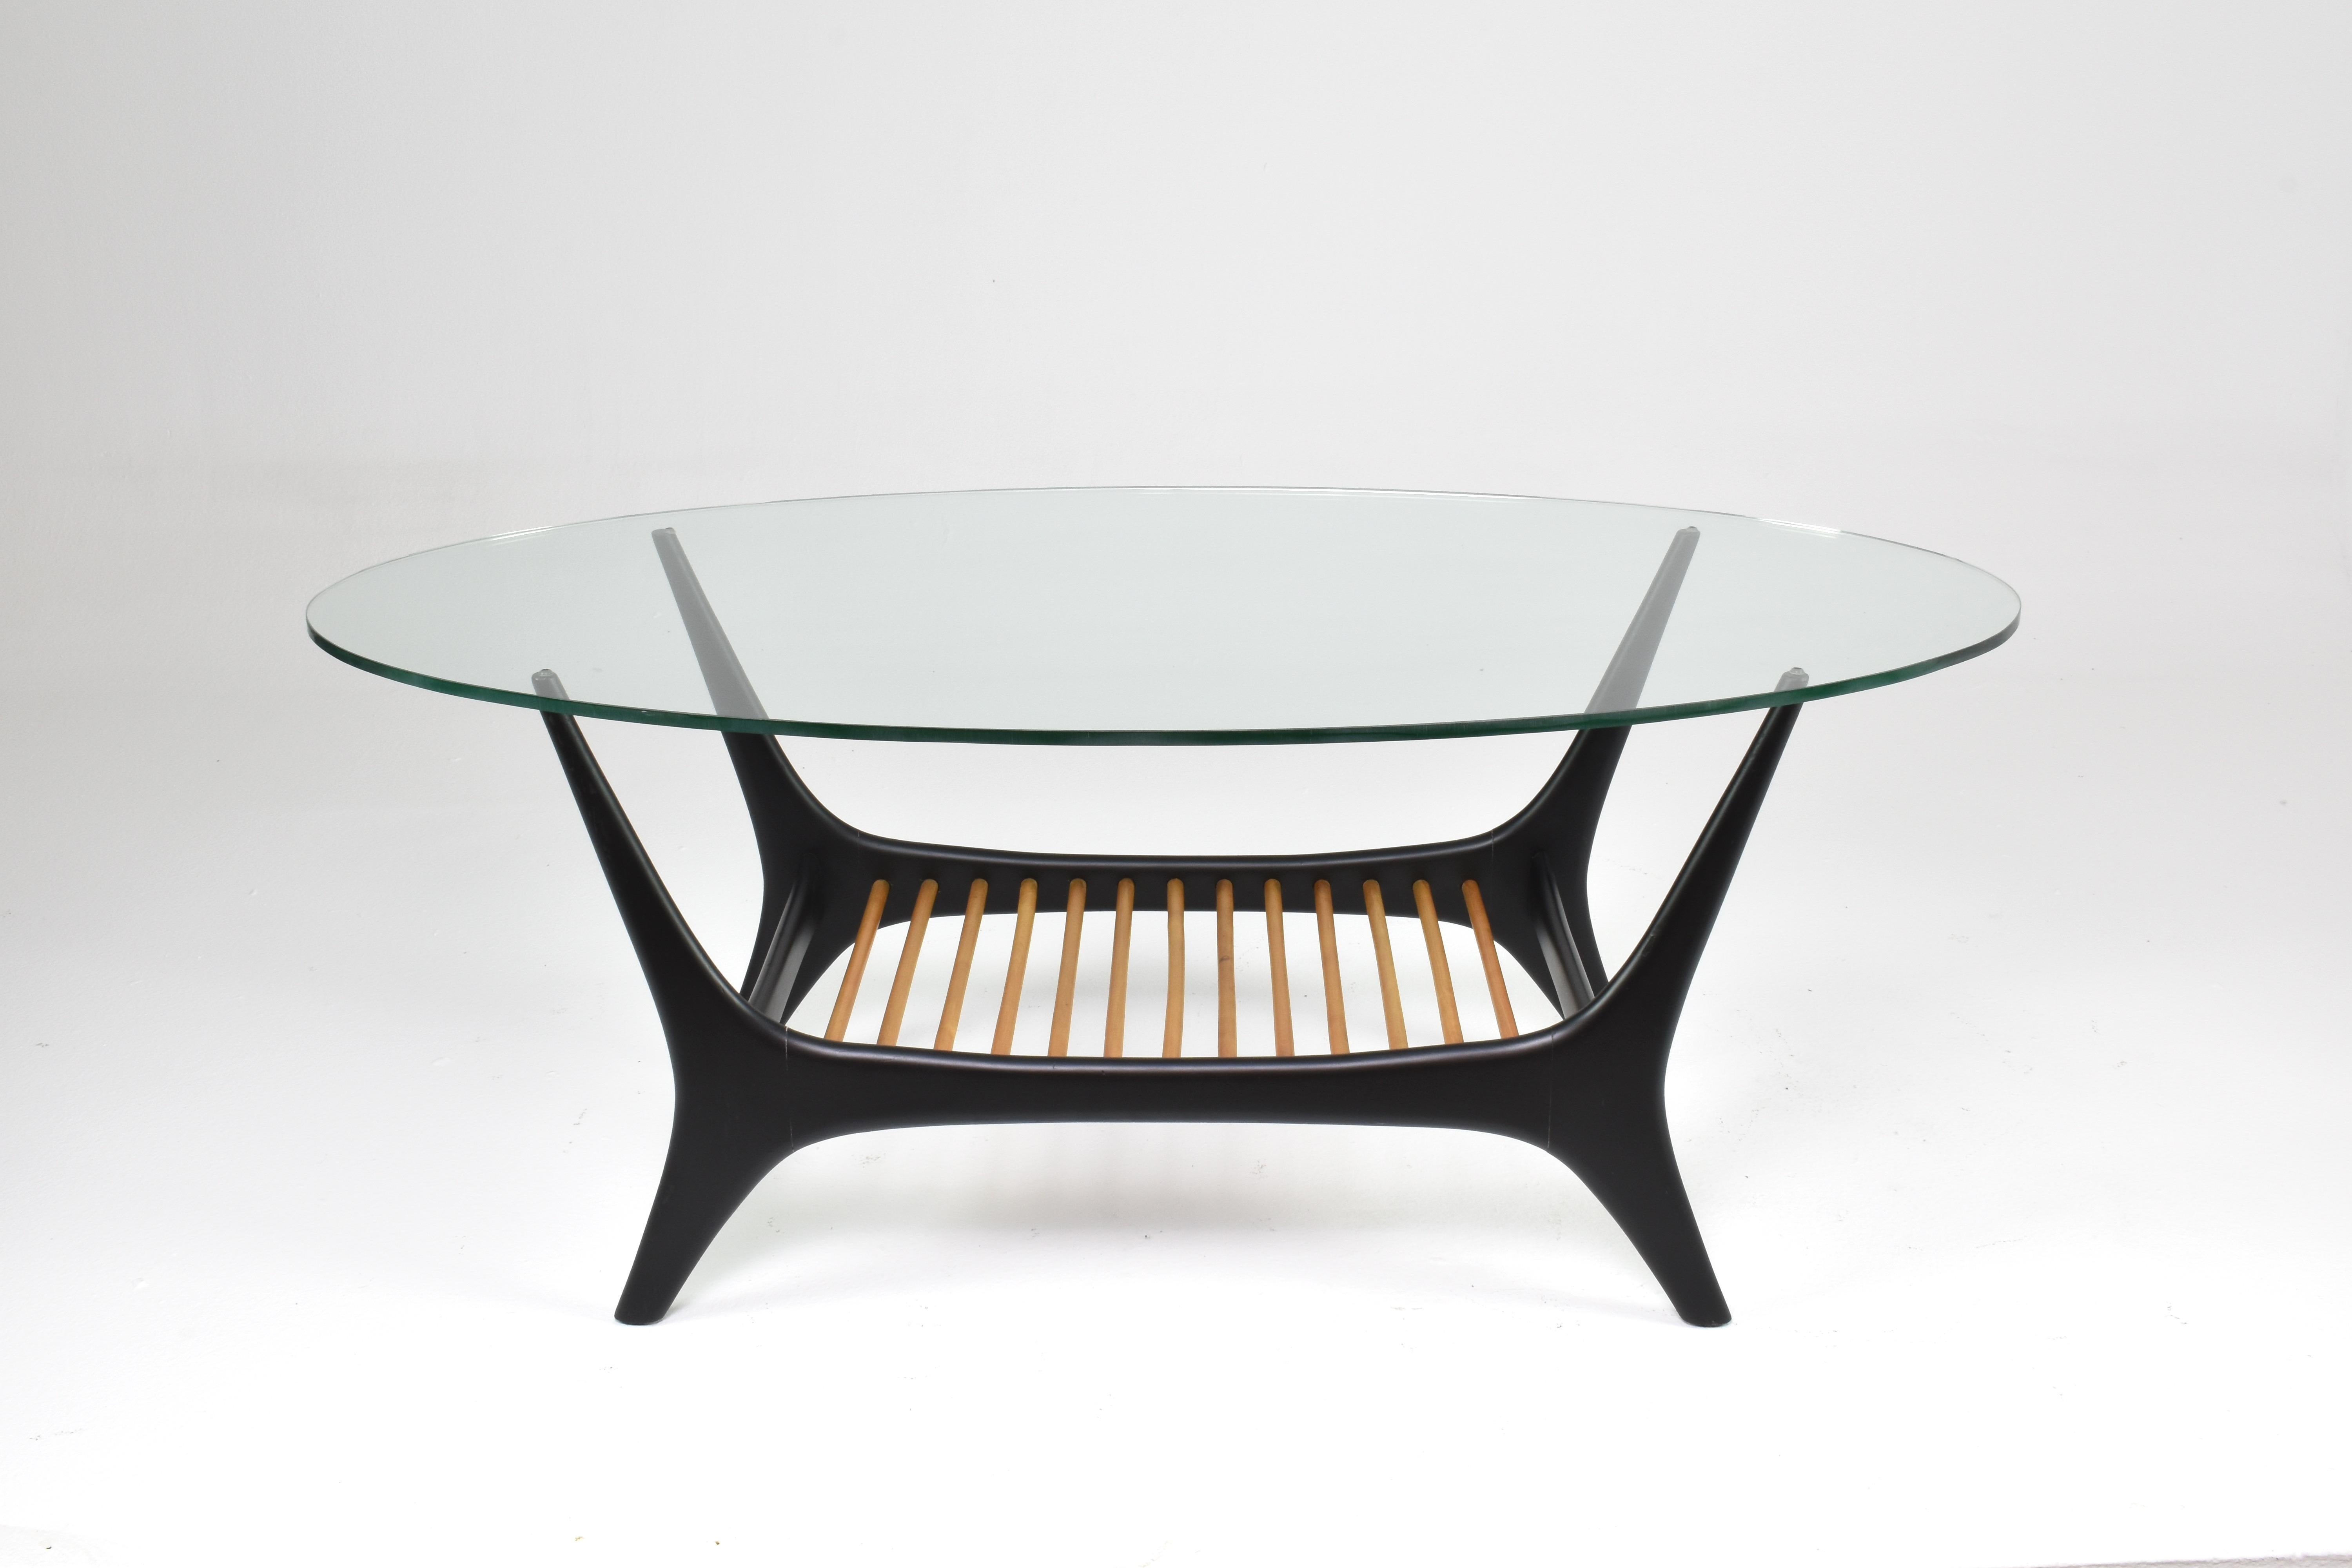 The 'Number 208' coffee table, is a notable piece of mid-century modern design, crafted by Alfred Hendrickx for the esteemed Belgian manufacturer Belform around 1955. This meticulously restored two-tiered table features a robust wooden panel on the